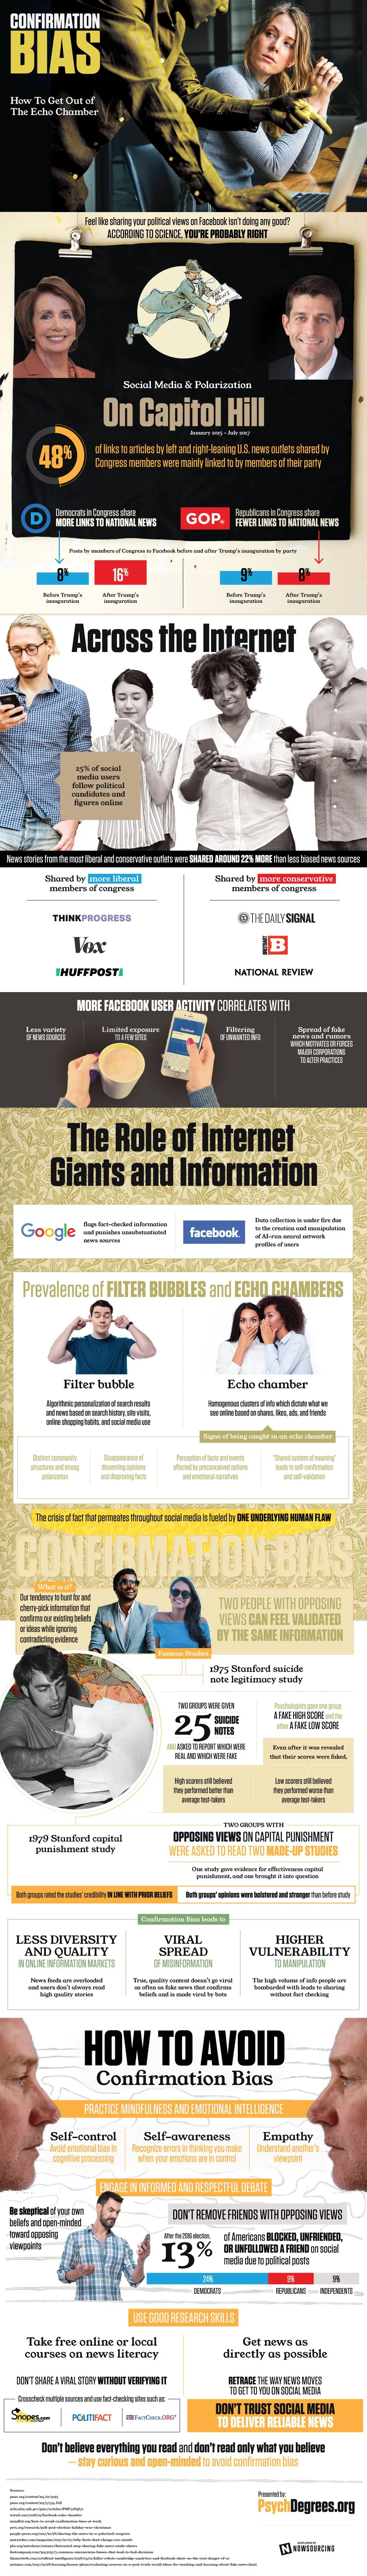 Is Social Media Putting Us All In An Echo Chamber? - #infographic